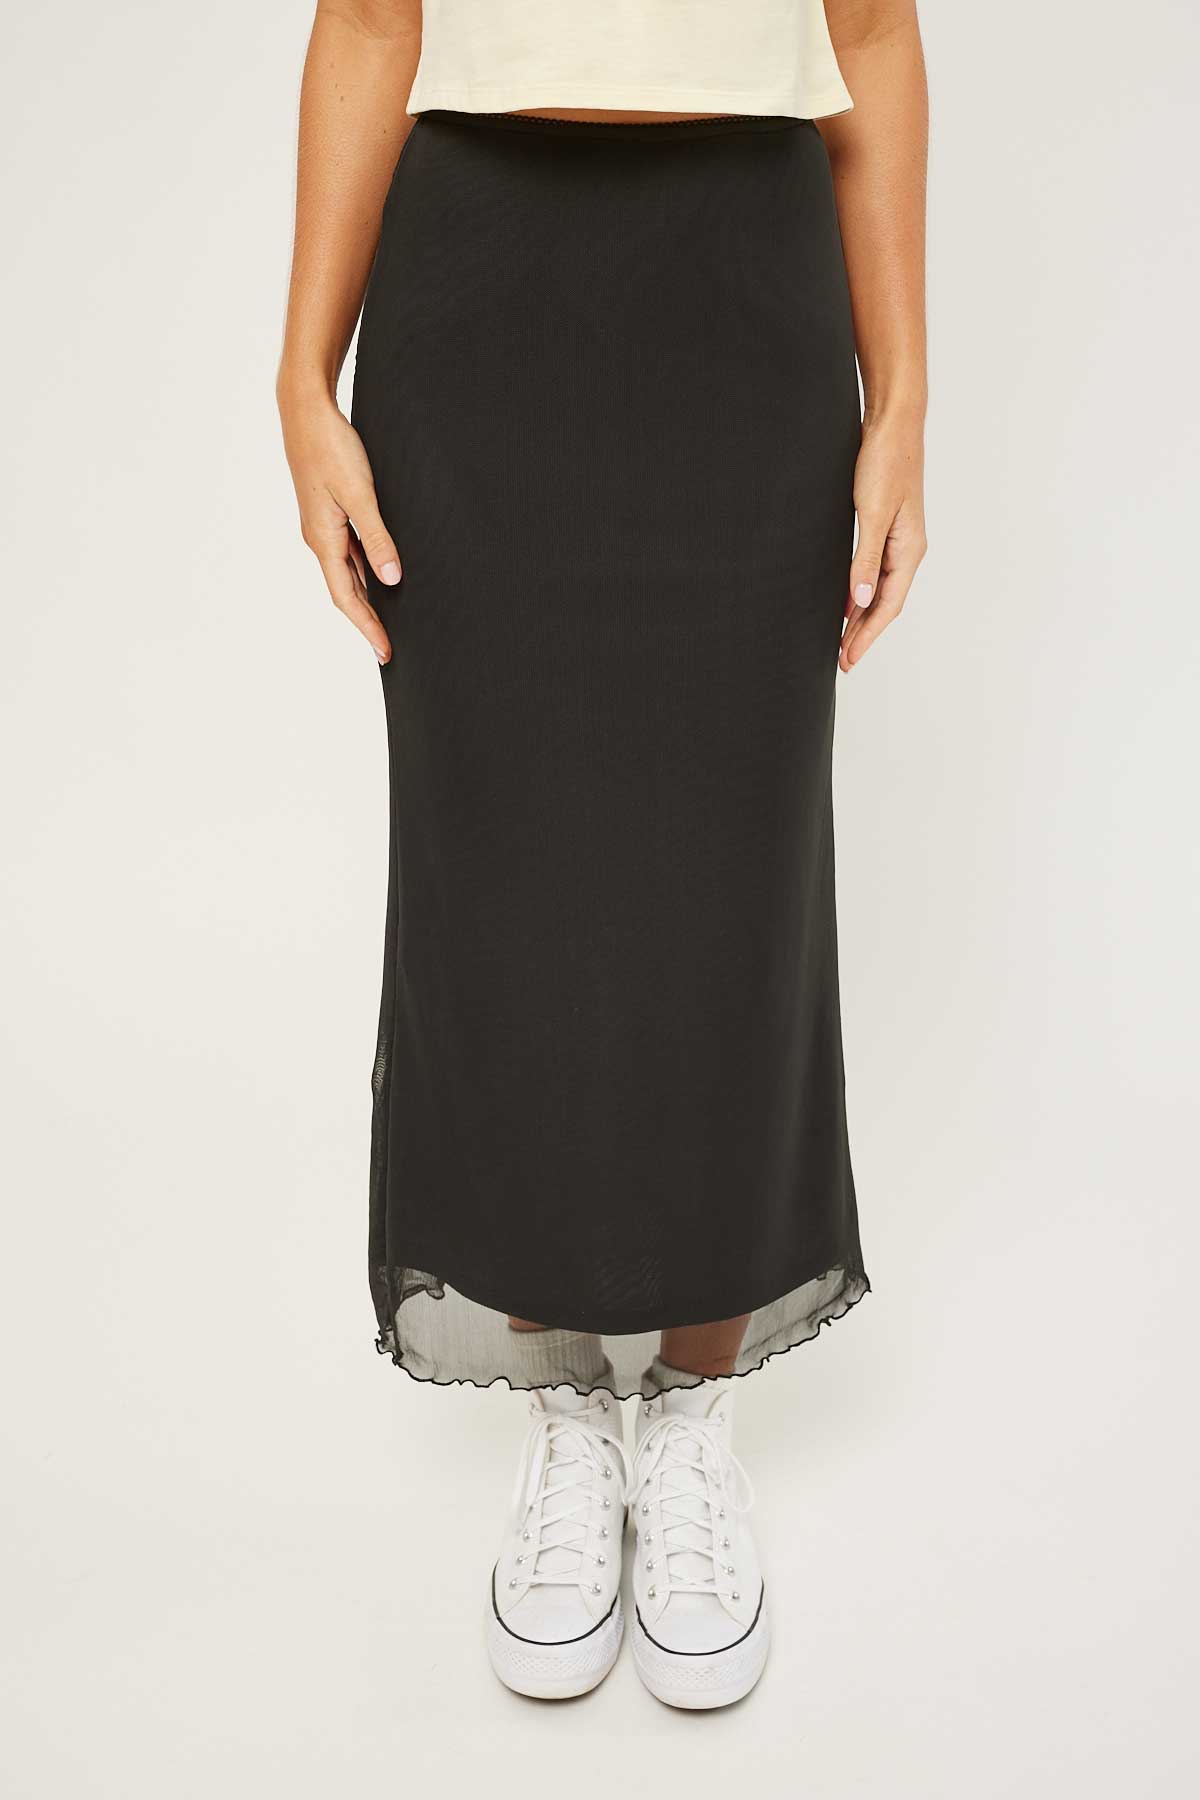 Luck & Trouble Kyle Recycled Mesh Midi Black